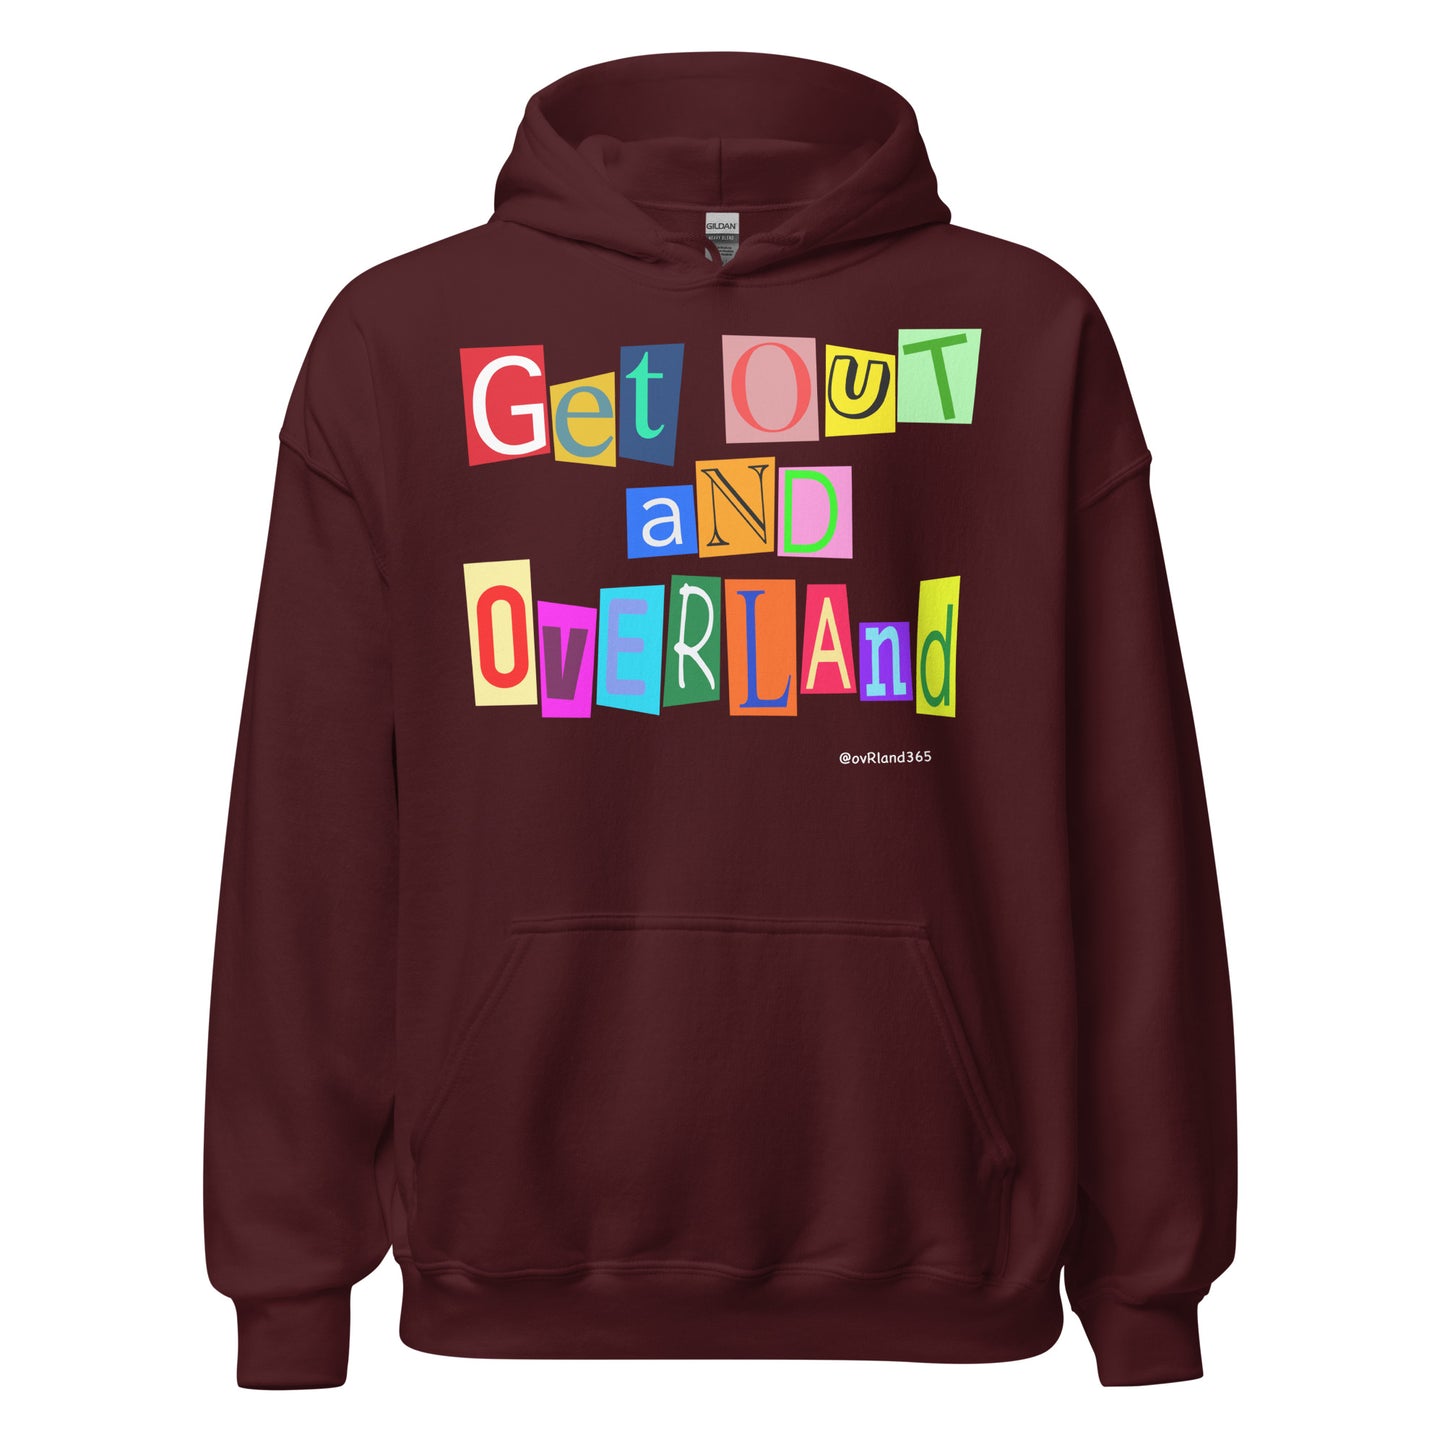 Maroon color Get OuT aND OvERLand Hoodie. overland365.com